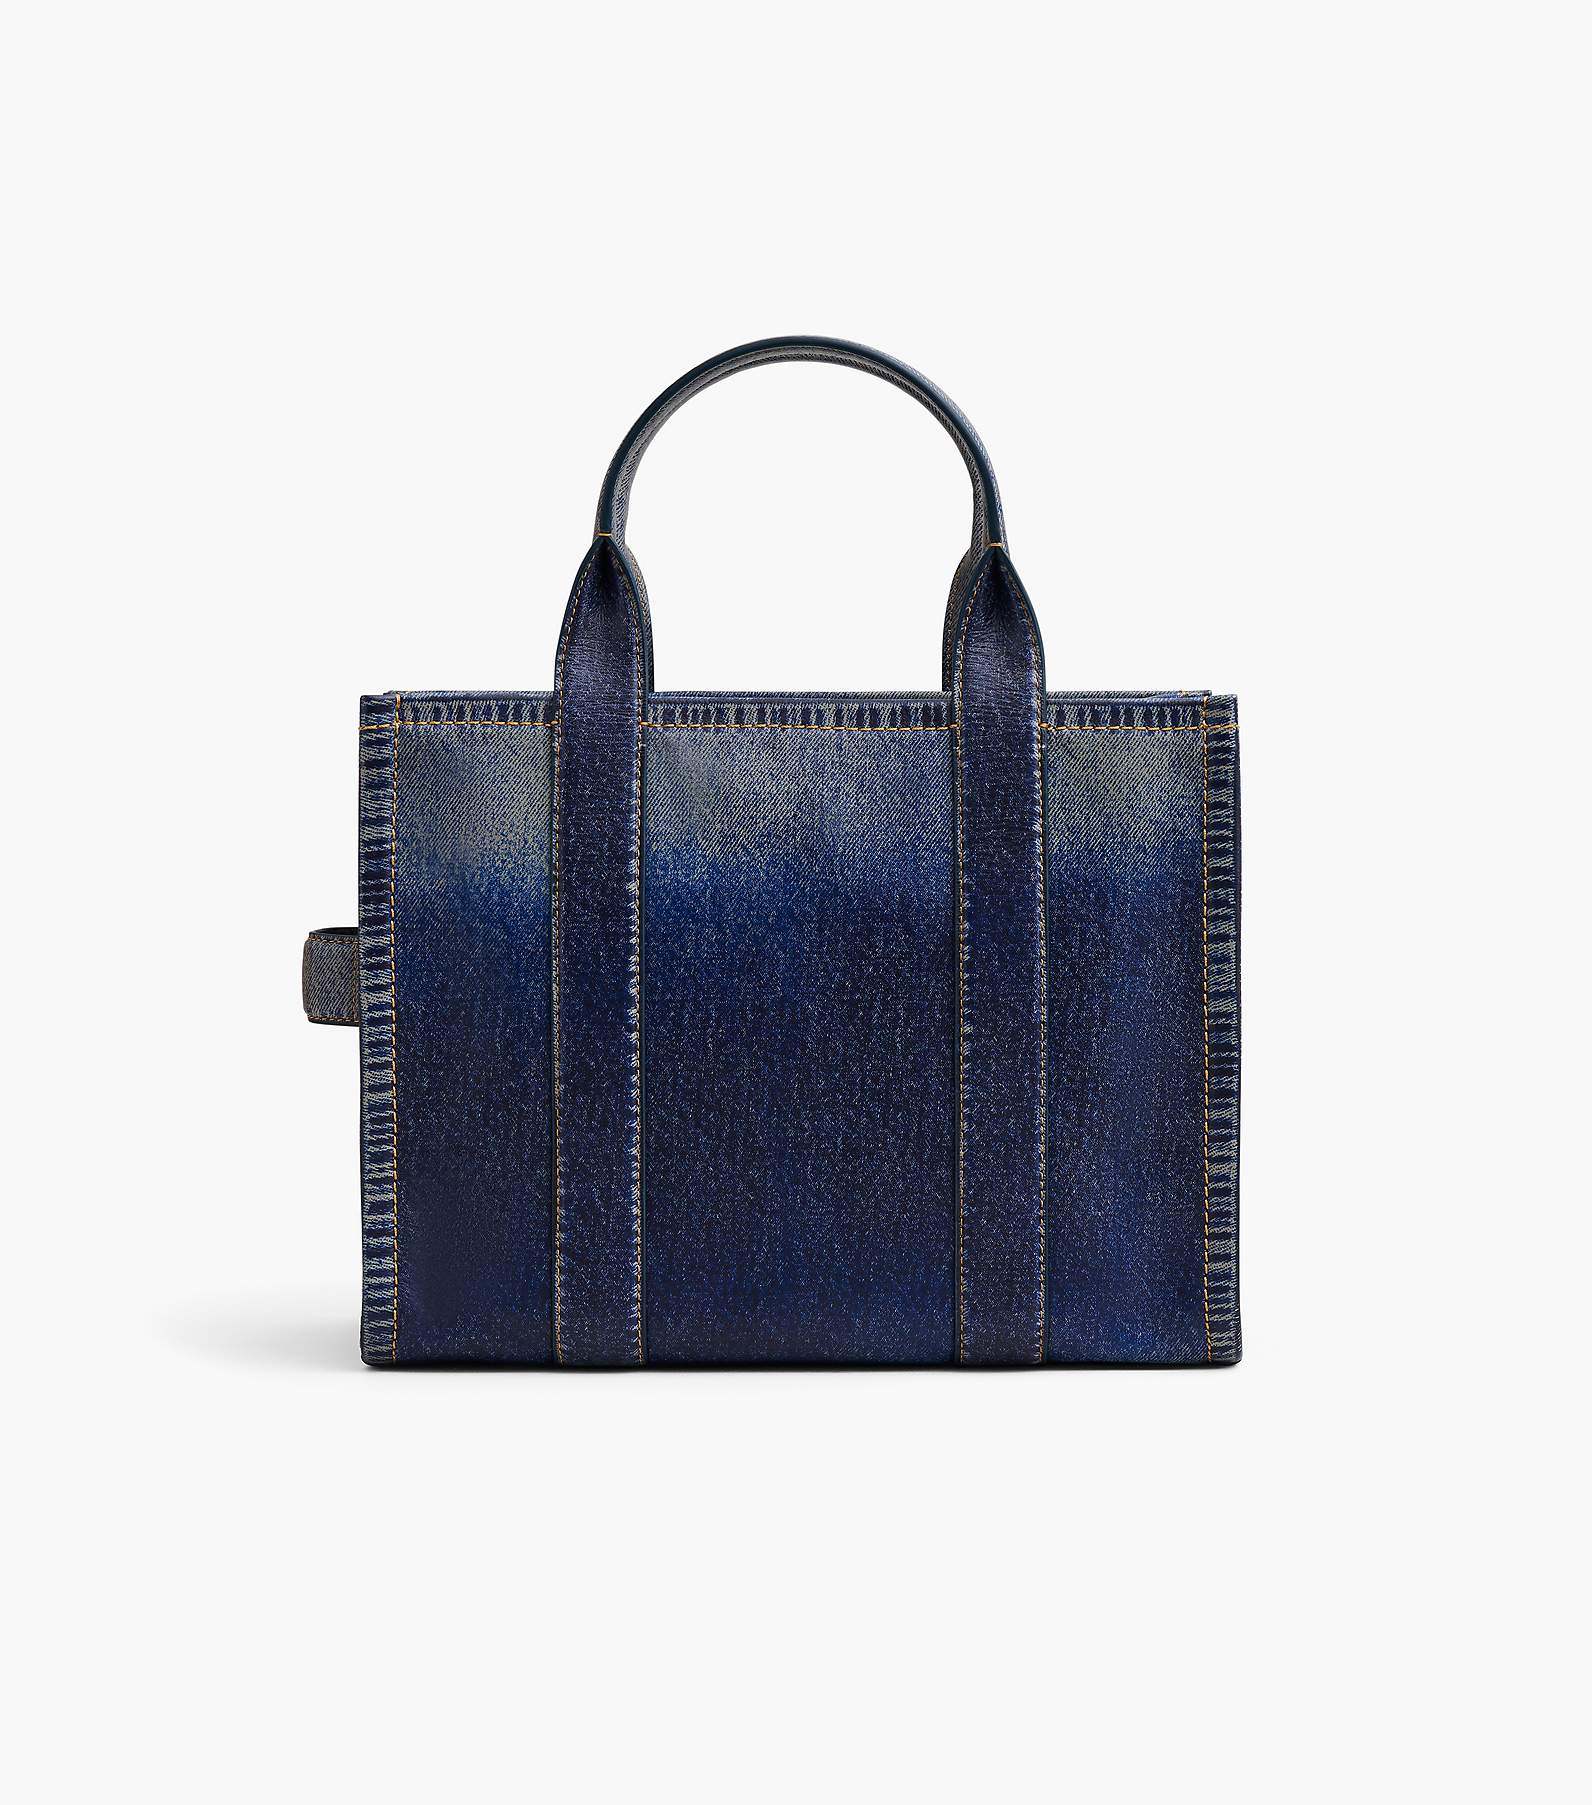 Marc Jacobs The Denim Small Tote Bag in Black